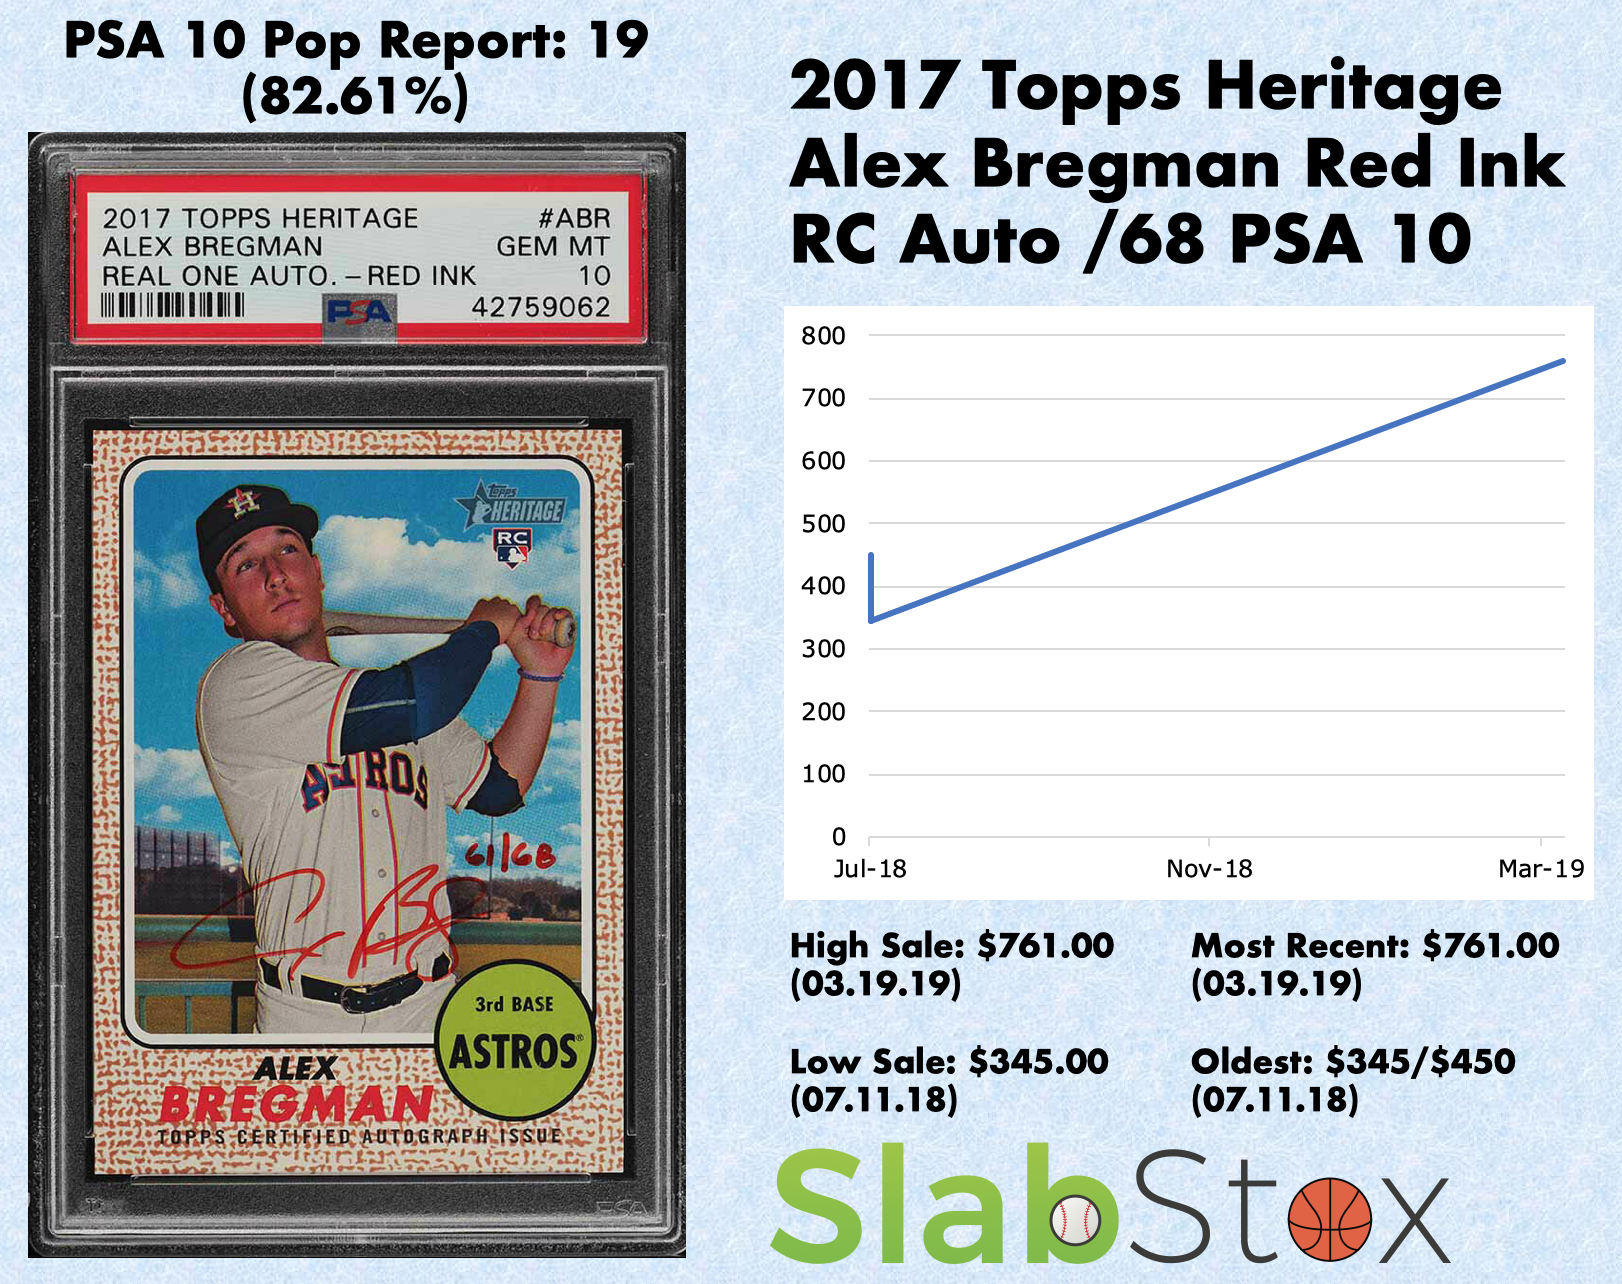 SlabStox infographic for 2017 Topps Heritage Alex Bregman Red Ink RC Auto /69 PSA 10 sports trading card